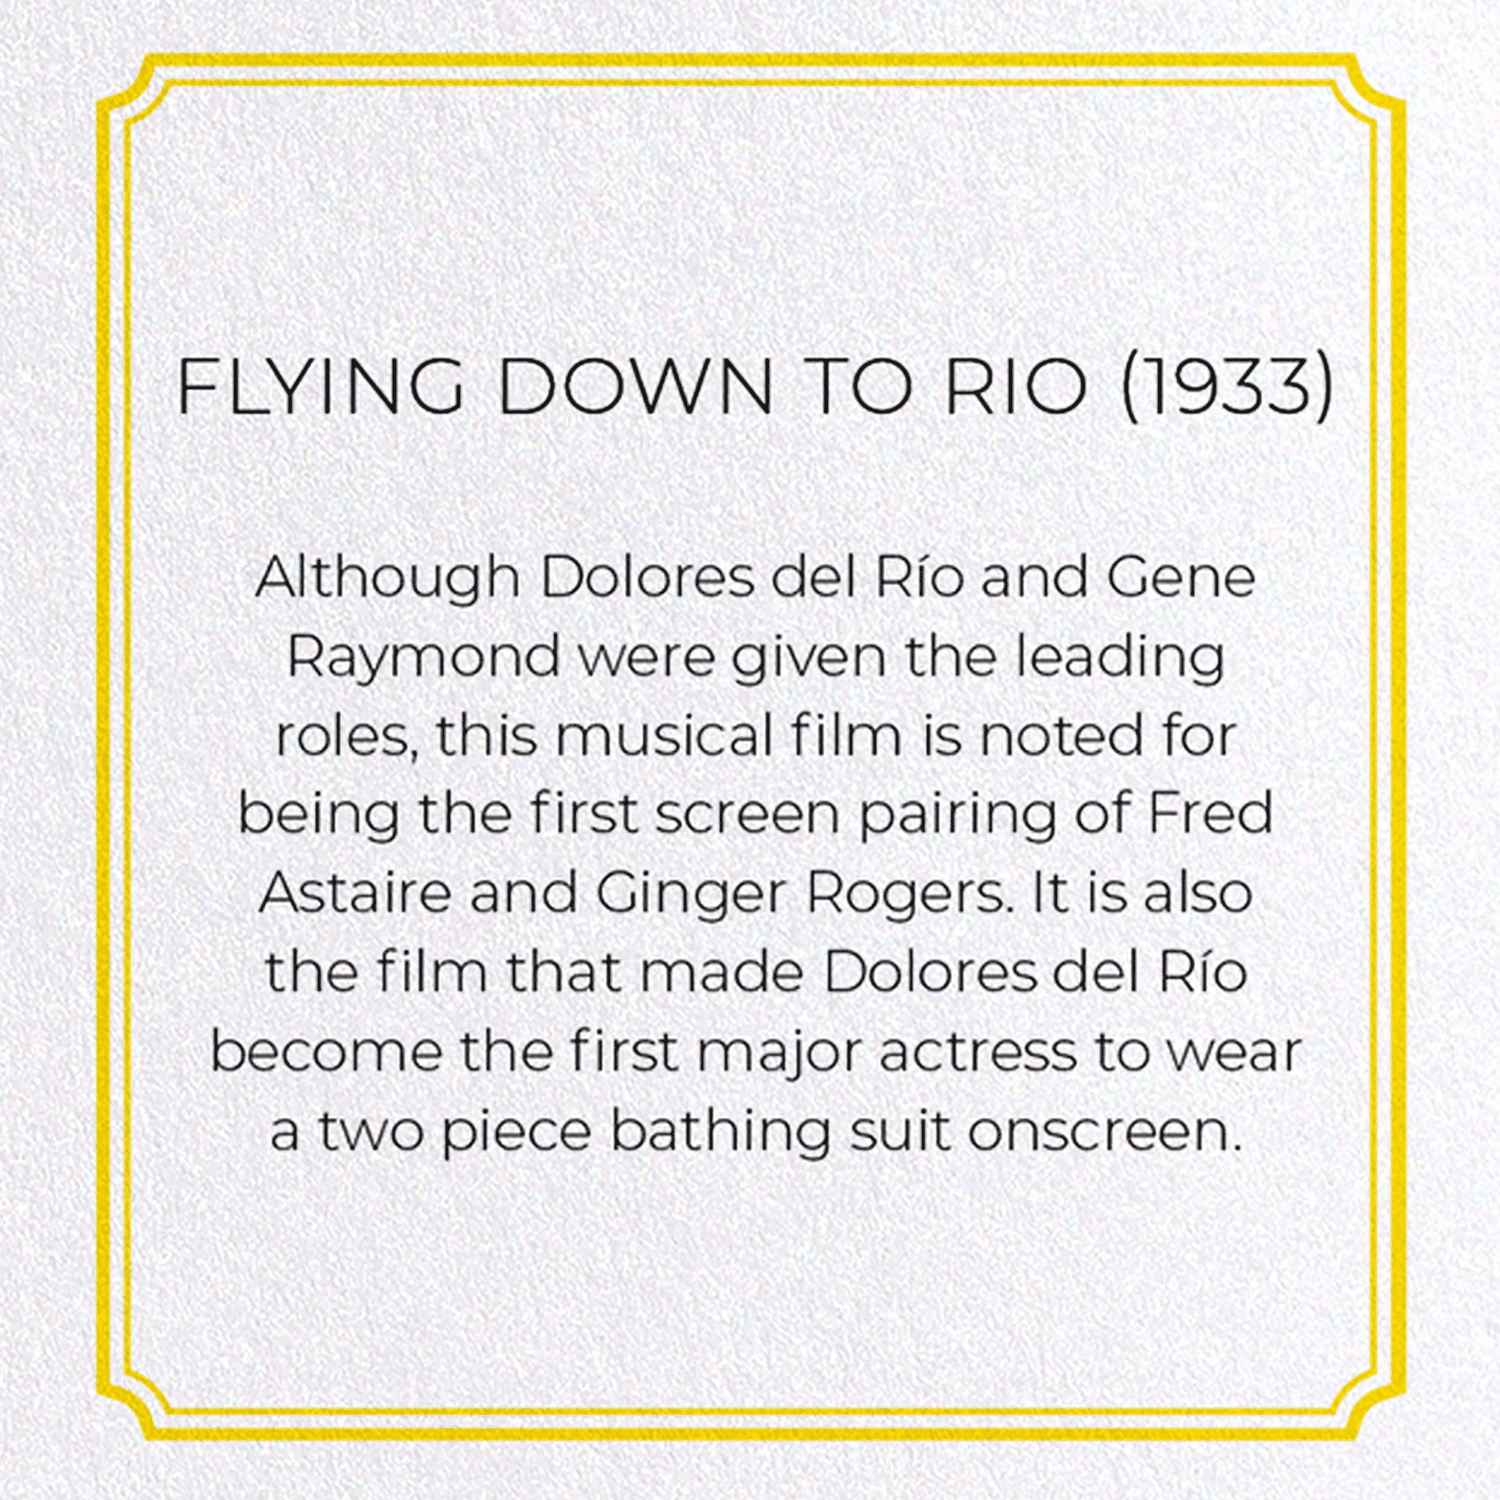 FLYING DOWN TO RIO (1933)